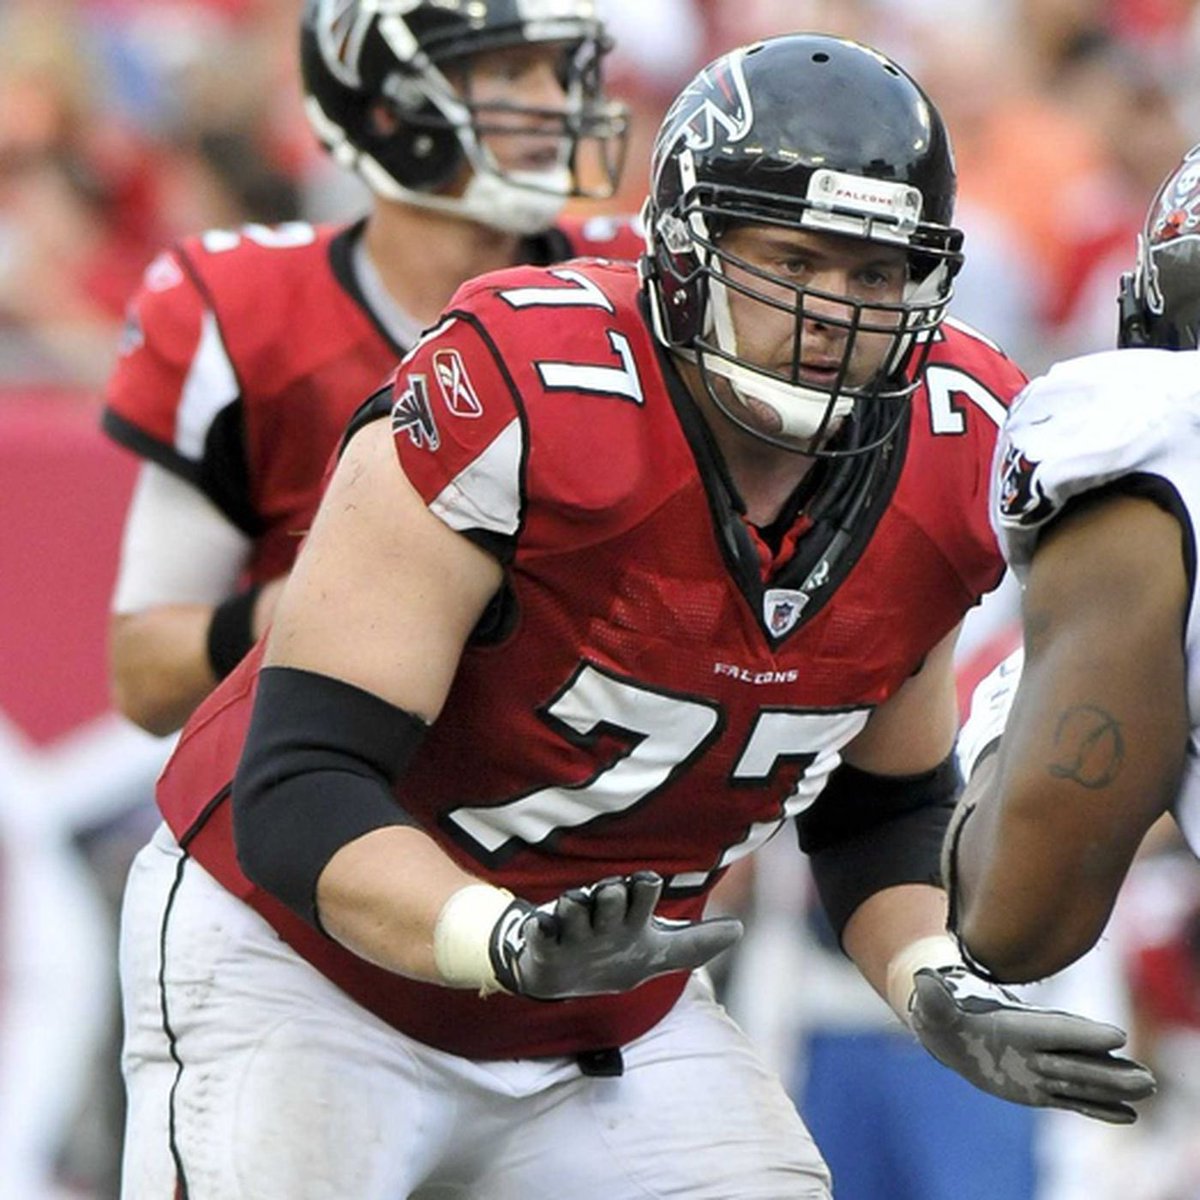 There are 77 days until the start of the NFL season.

No. 77 @TysonClabo played for the #Falcons from 2005-2013. He made the Pro Bowl in 2010. He was named to Atlanta’s All-Decade Team in 2020 https://t.co/Szc3r1fPTg